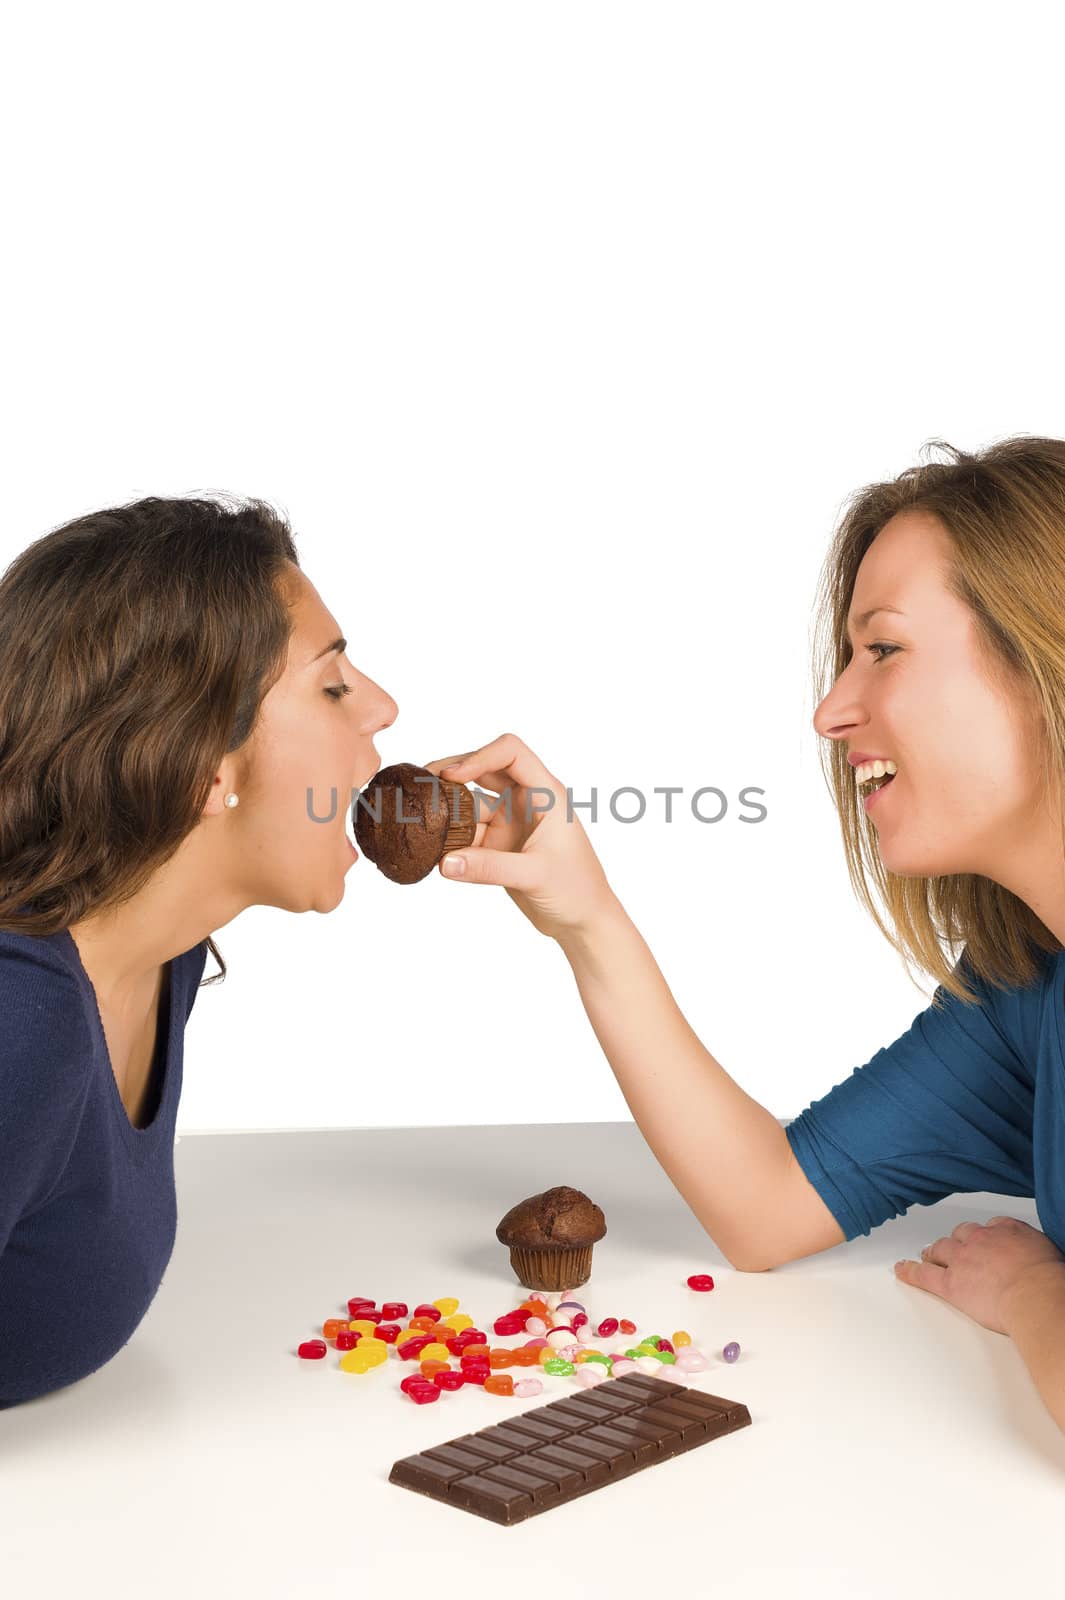 Biting into a muffin, a sweet treat